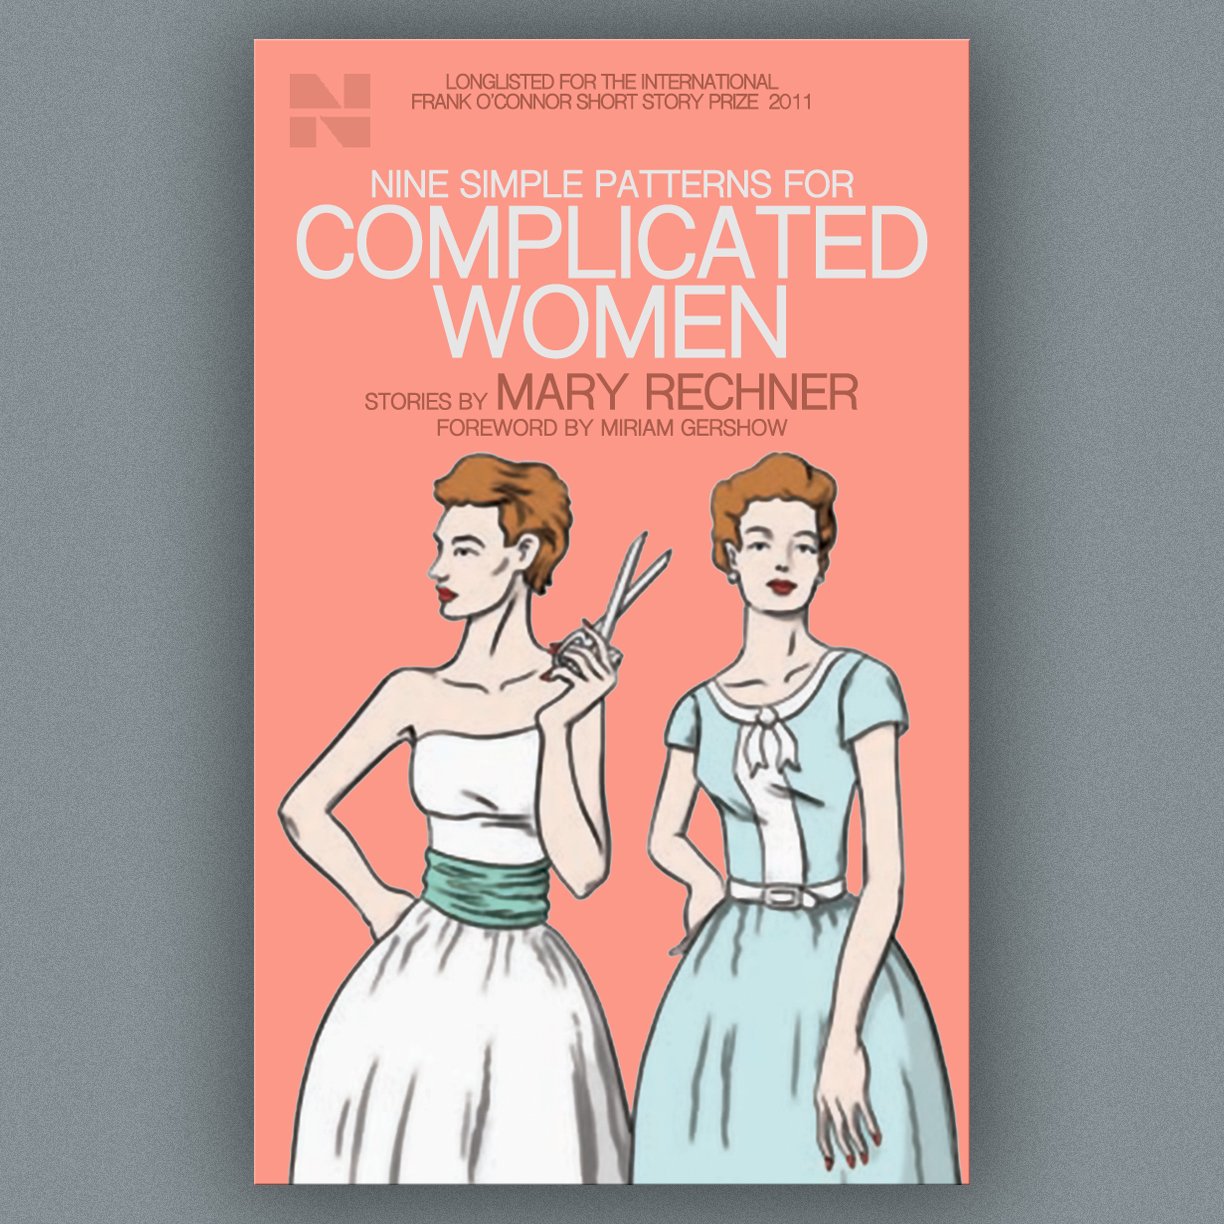 NINE SIMPLE PATTERNS FOR COMPLICATED WOMEN by Mary Rechner, foreword by Miriam Gershow — Propeller Books